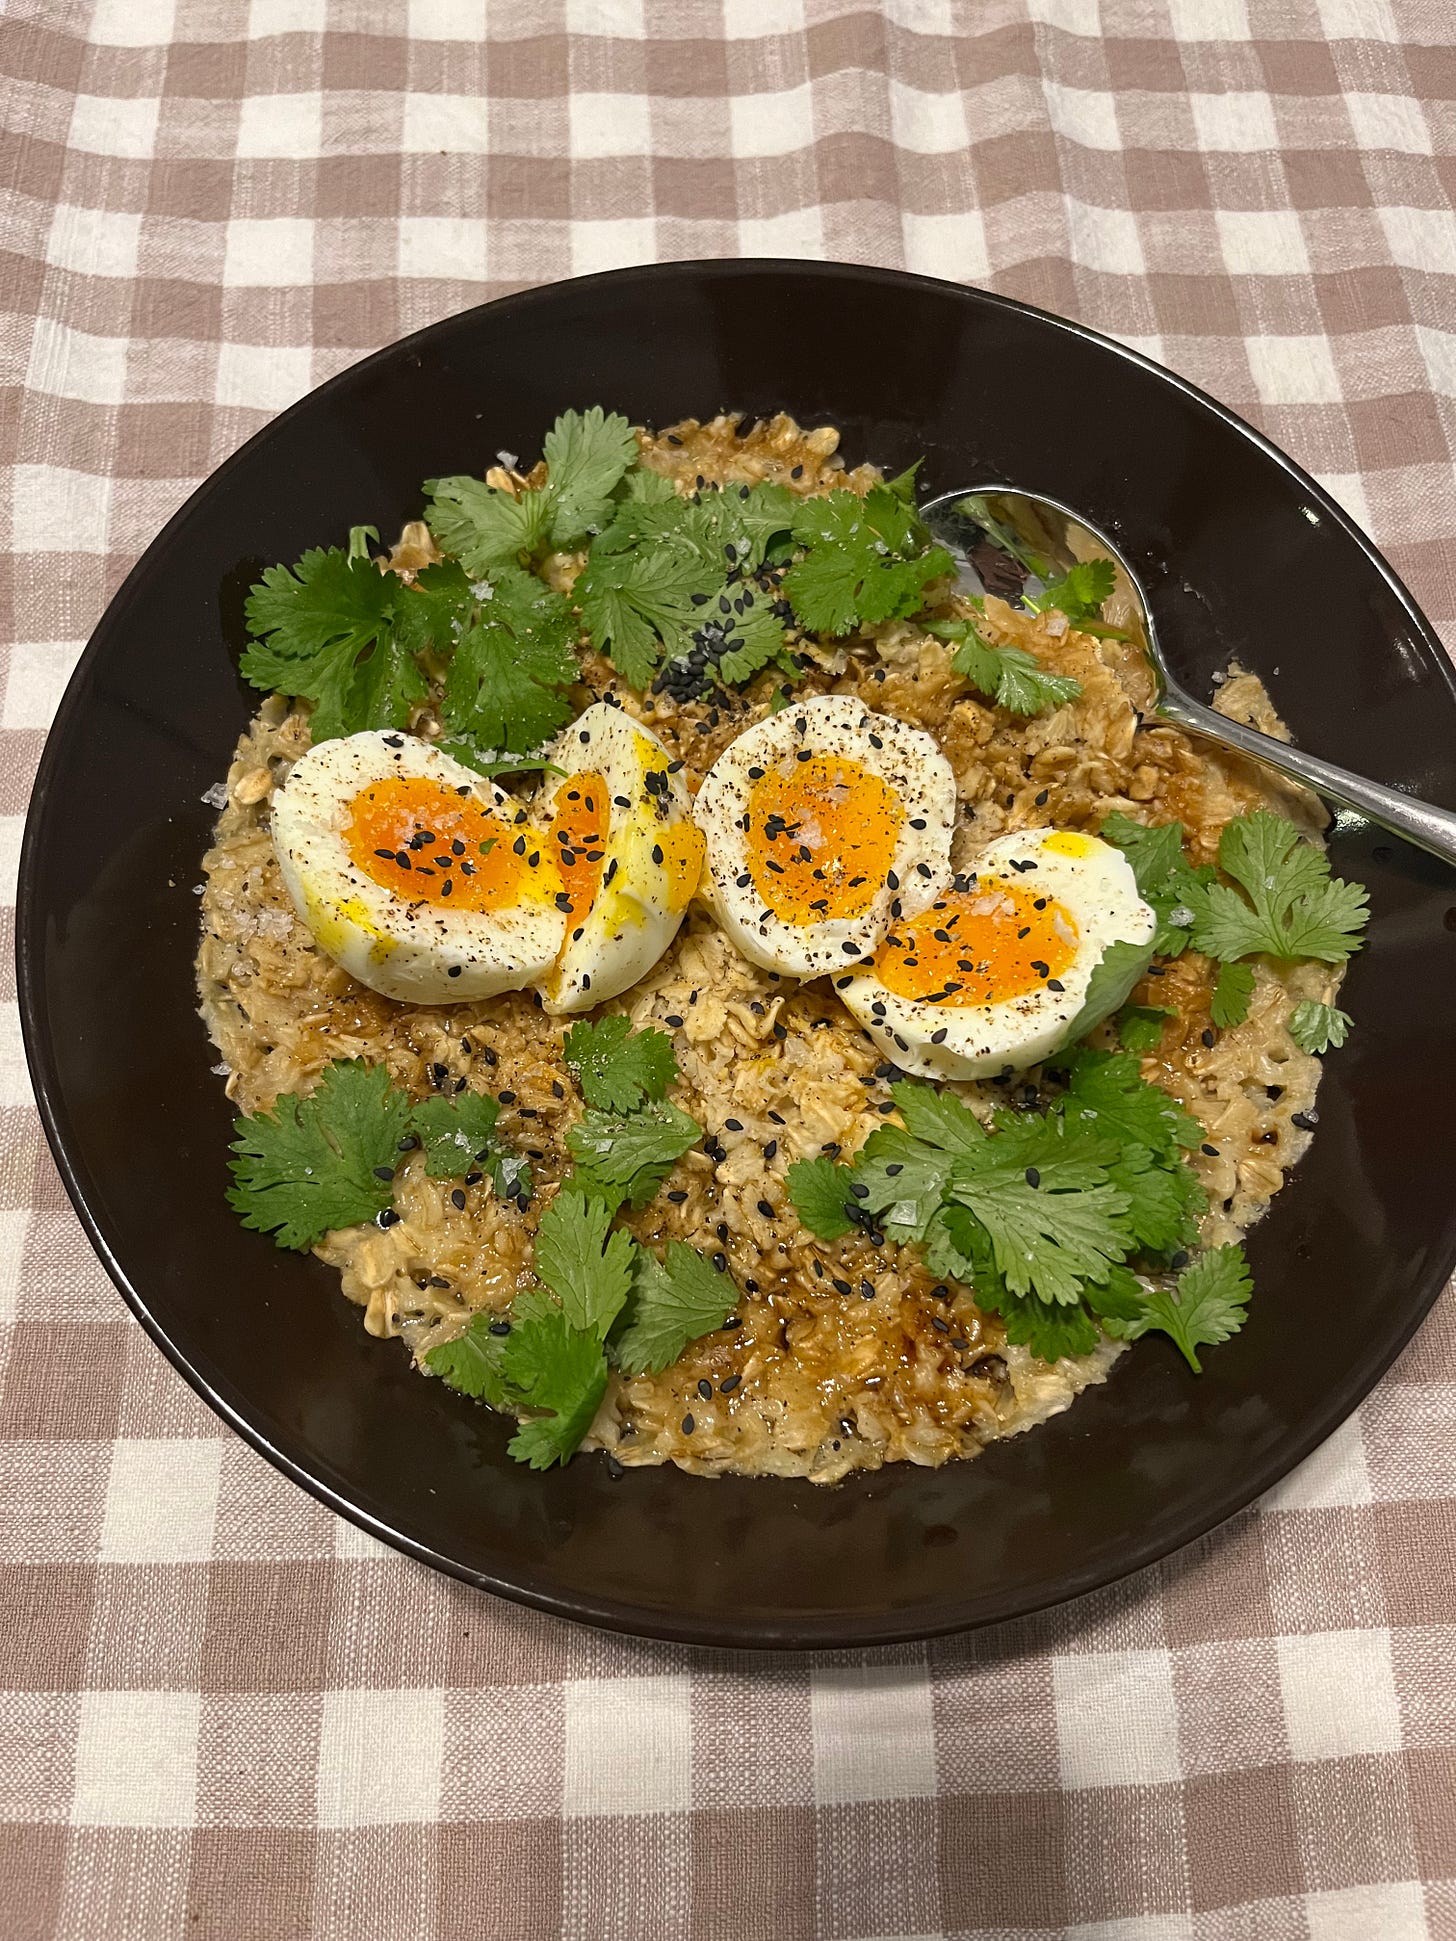 bowl of oatmeal with cilantro, eggs, and sesame seeds